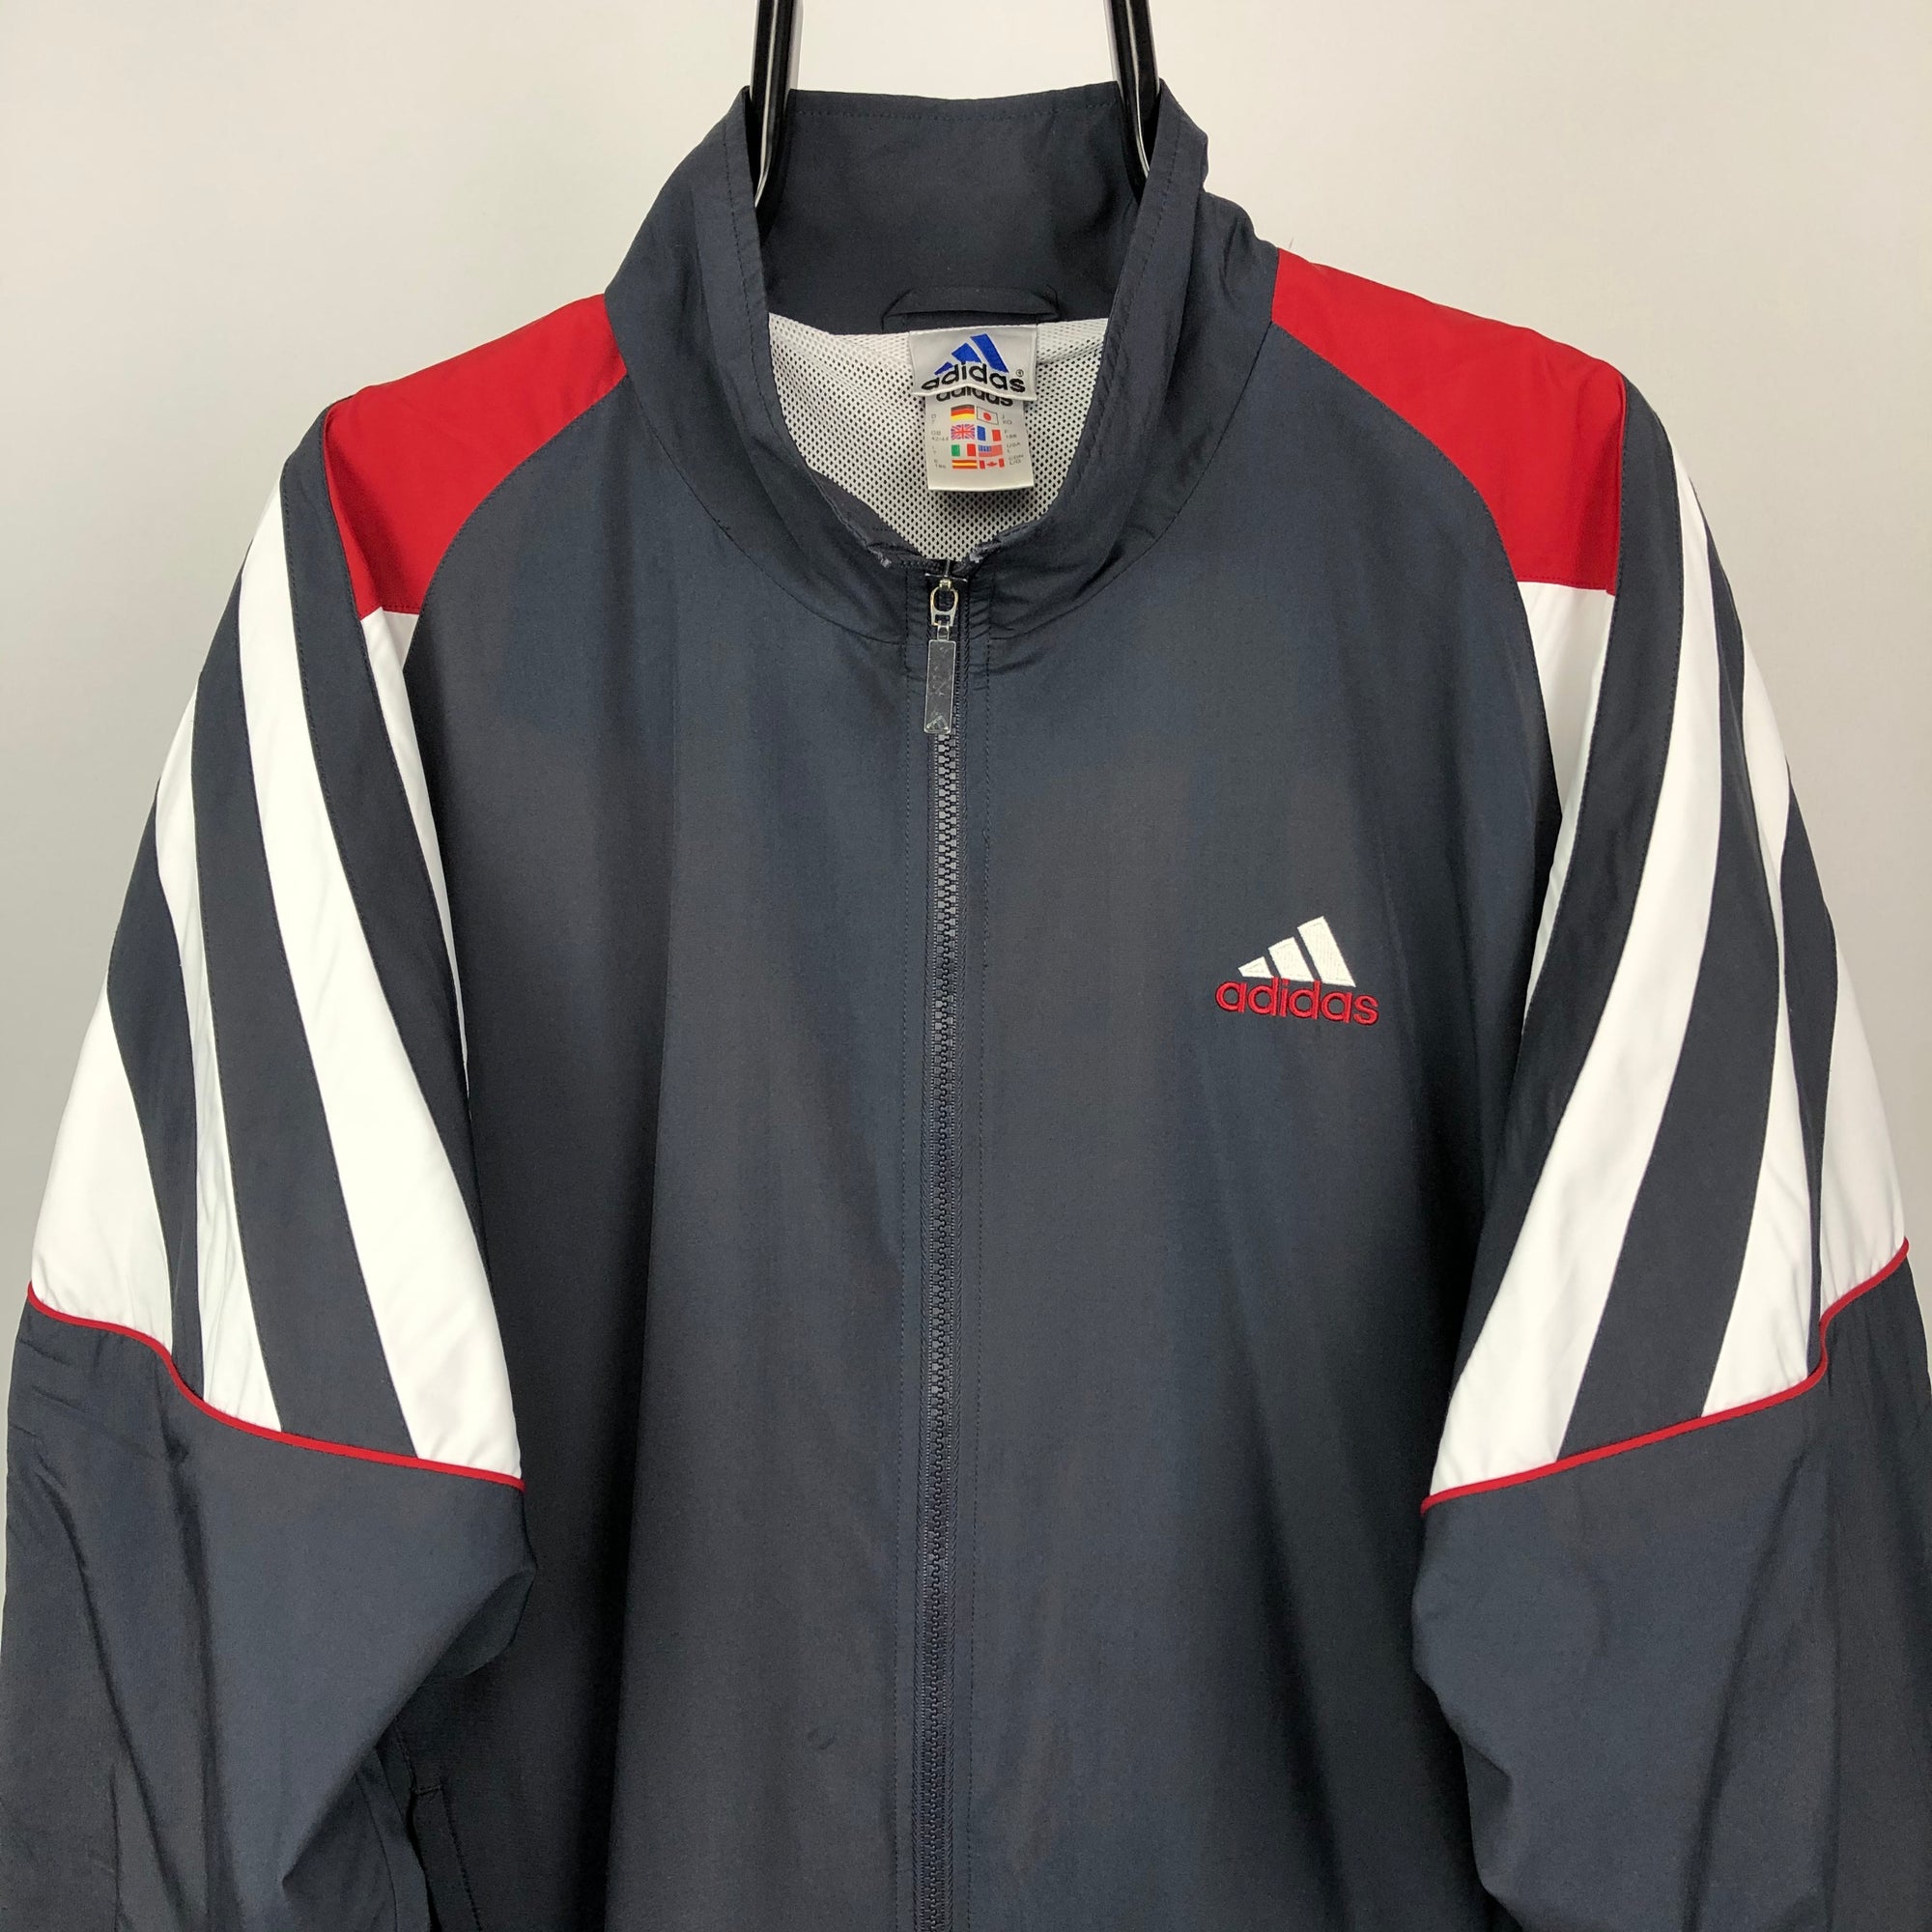 Vintage 90s Adidas Track Jacket in Charcoal/Red/White - Men's Large/Women's XL